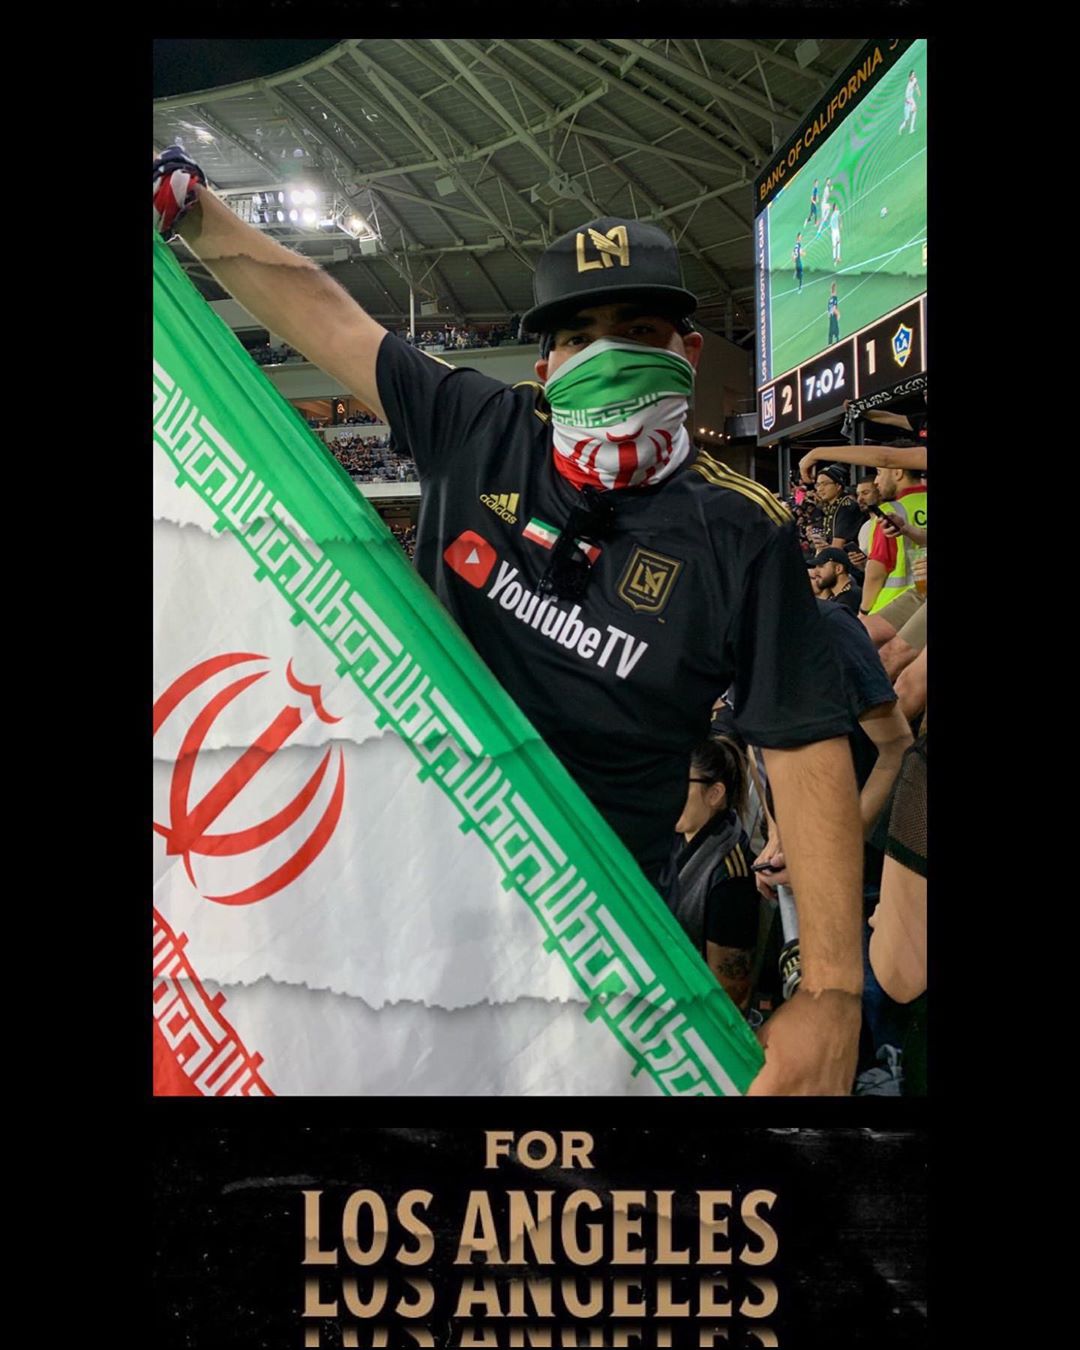 History ! Los Angeles! LA, You Keep giving me reasons to Love You @lafc 🇮🇷 🇲🇽 @lafc3252 @lafckrew